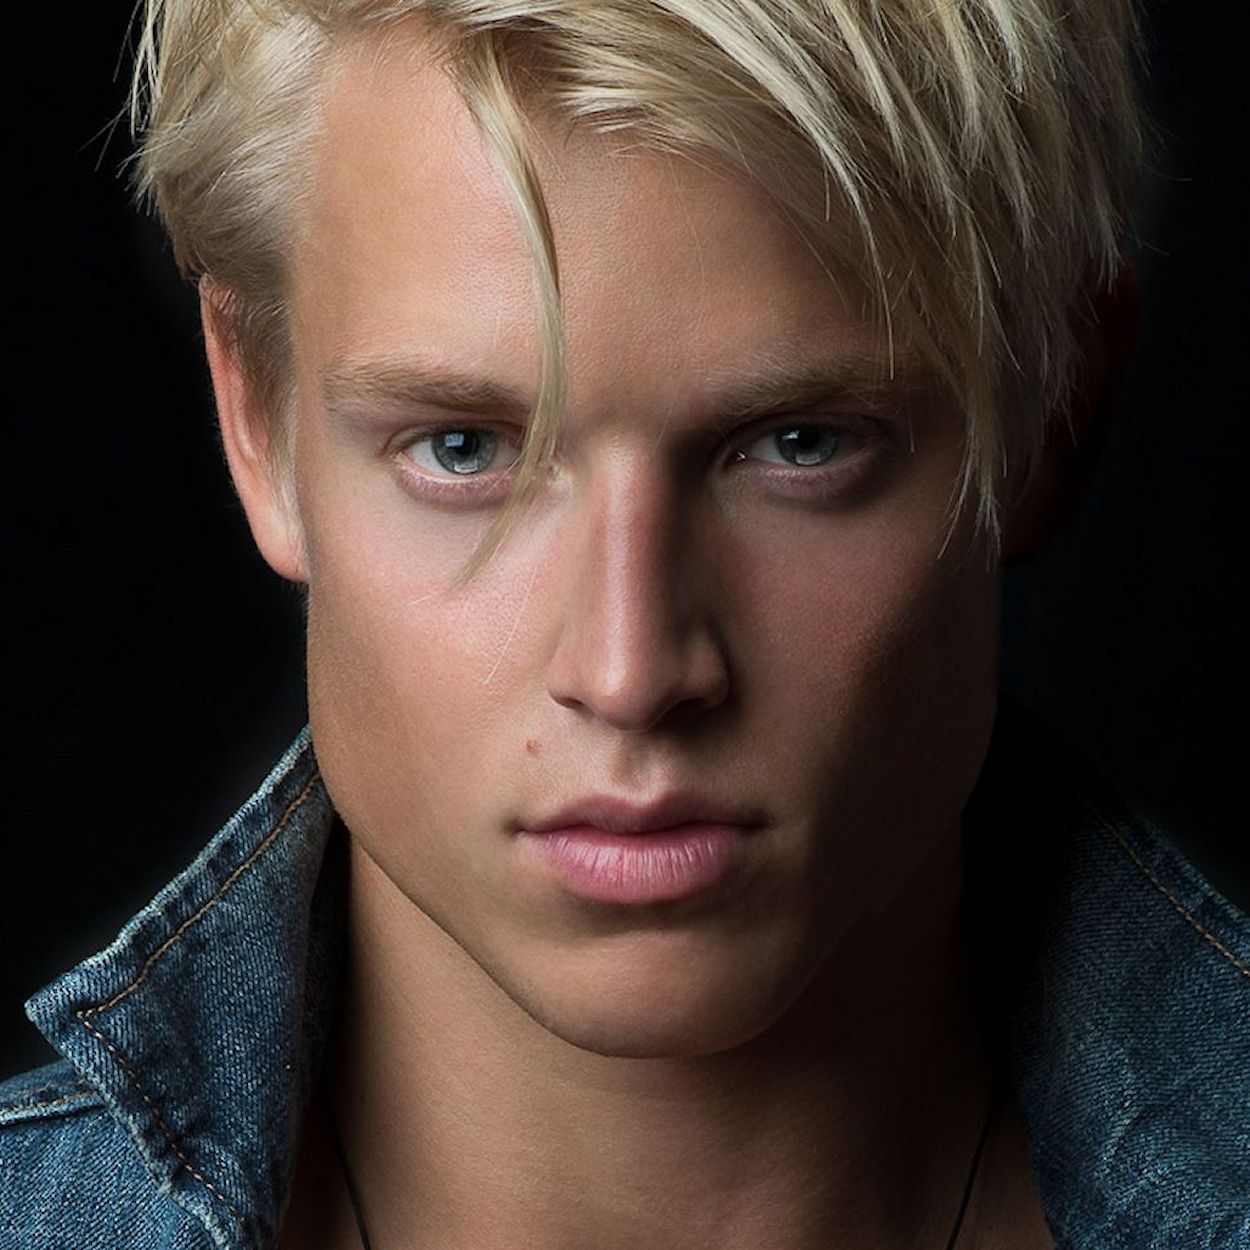 muscle-style:
“alphainsights:
“lifedistracted:
“Thor Bulow
”
Blonde boys get dirty quicker.
Be the boy He desires.
”
✌️Holy crap Batman. Thor is looking right at us. Model look smokn. Wowwwwww✌️👍👍🤪❤️❤️😄😊🙃😍😃😀😉😮😮🙂☺️😛😎😁👌
”
A